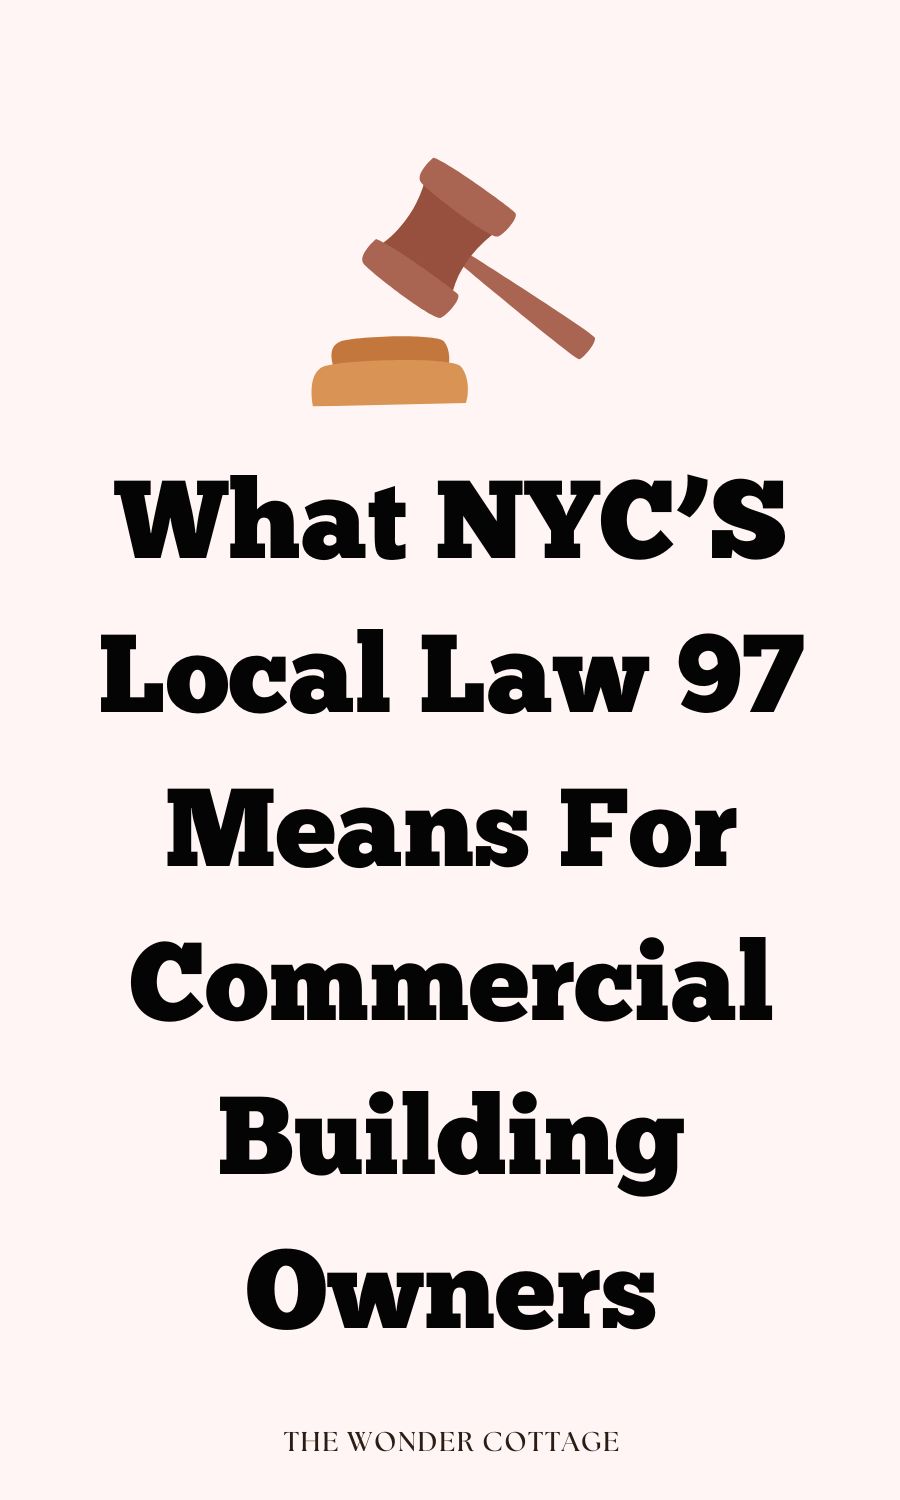 What NYC’S Local Law 97 Means For Commercial Building Owners